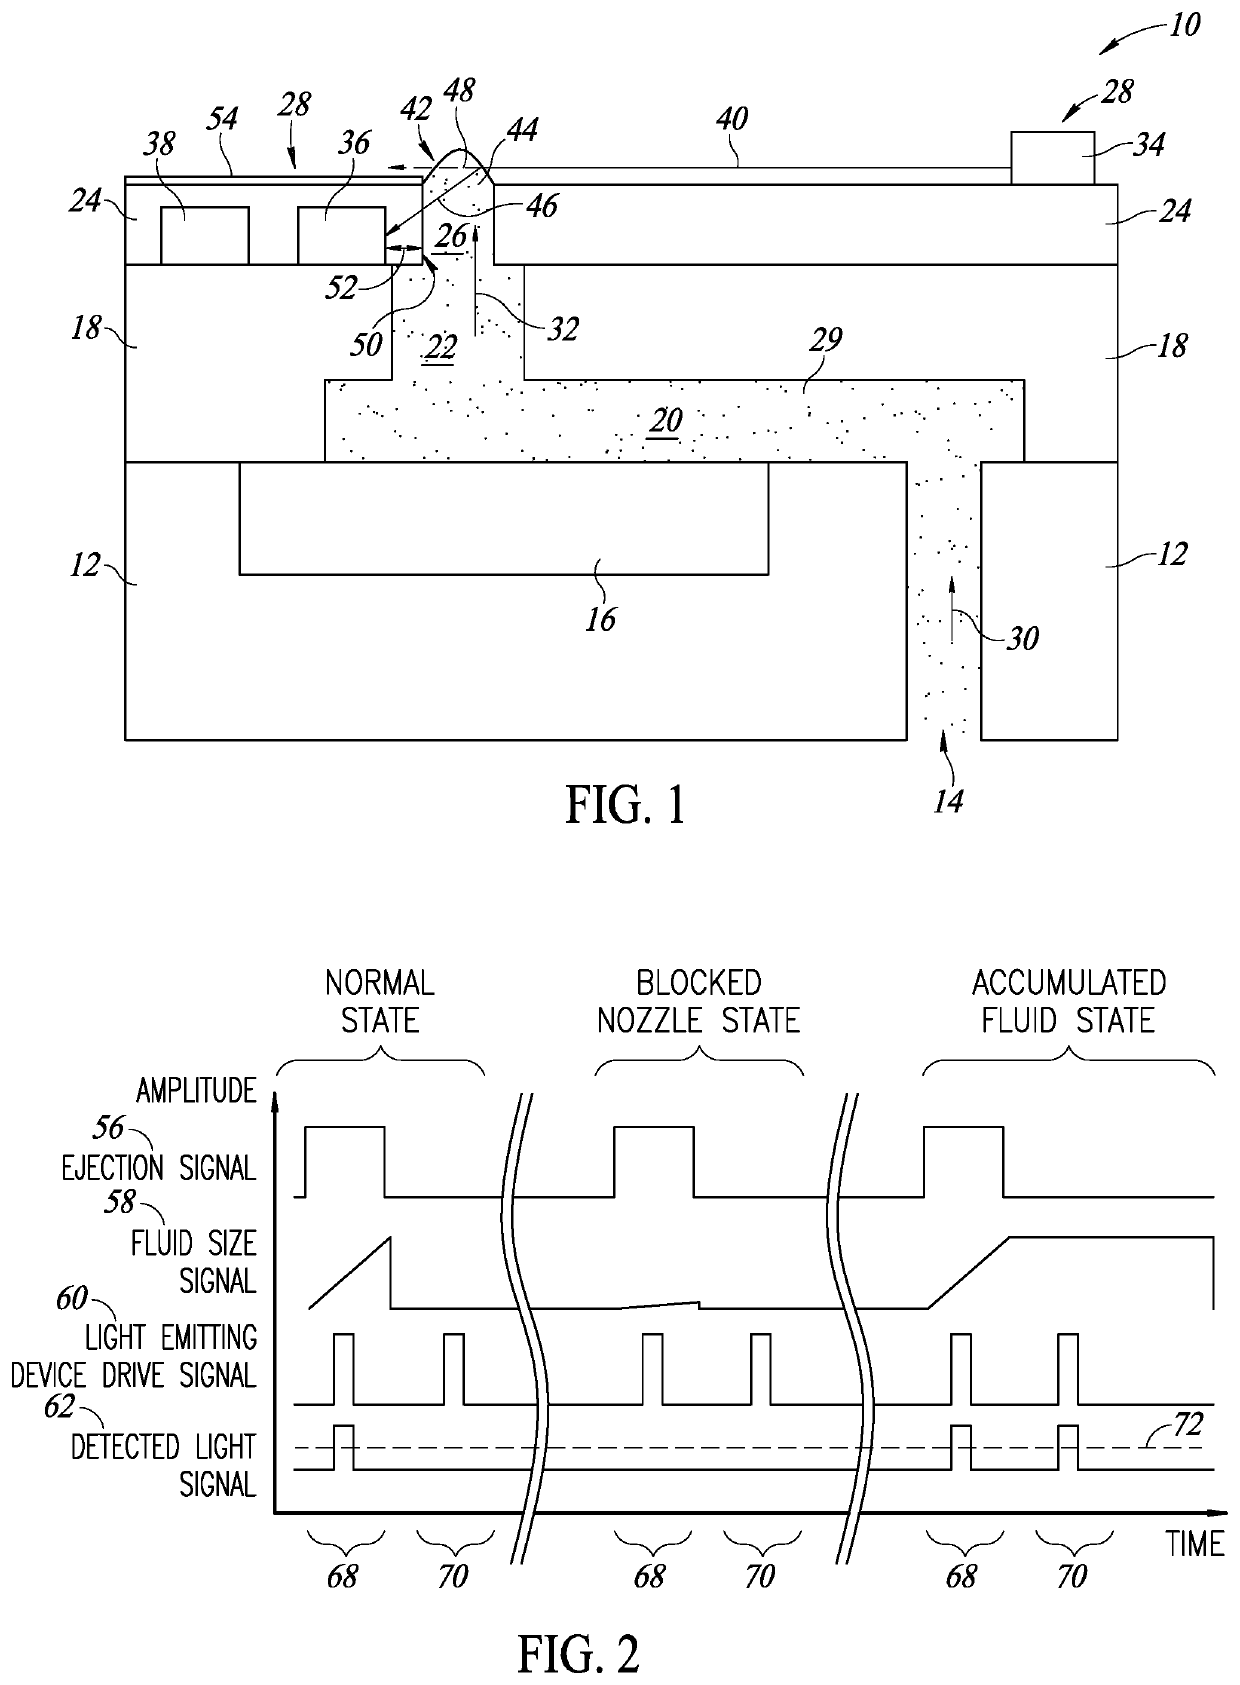 Fluidic ejection device with optical blockage detector